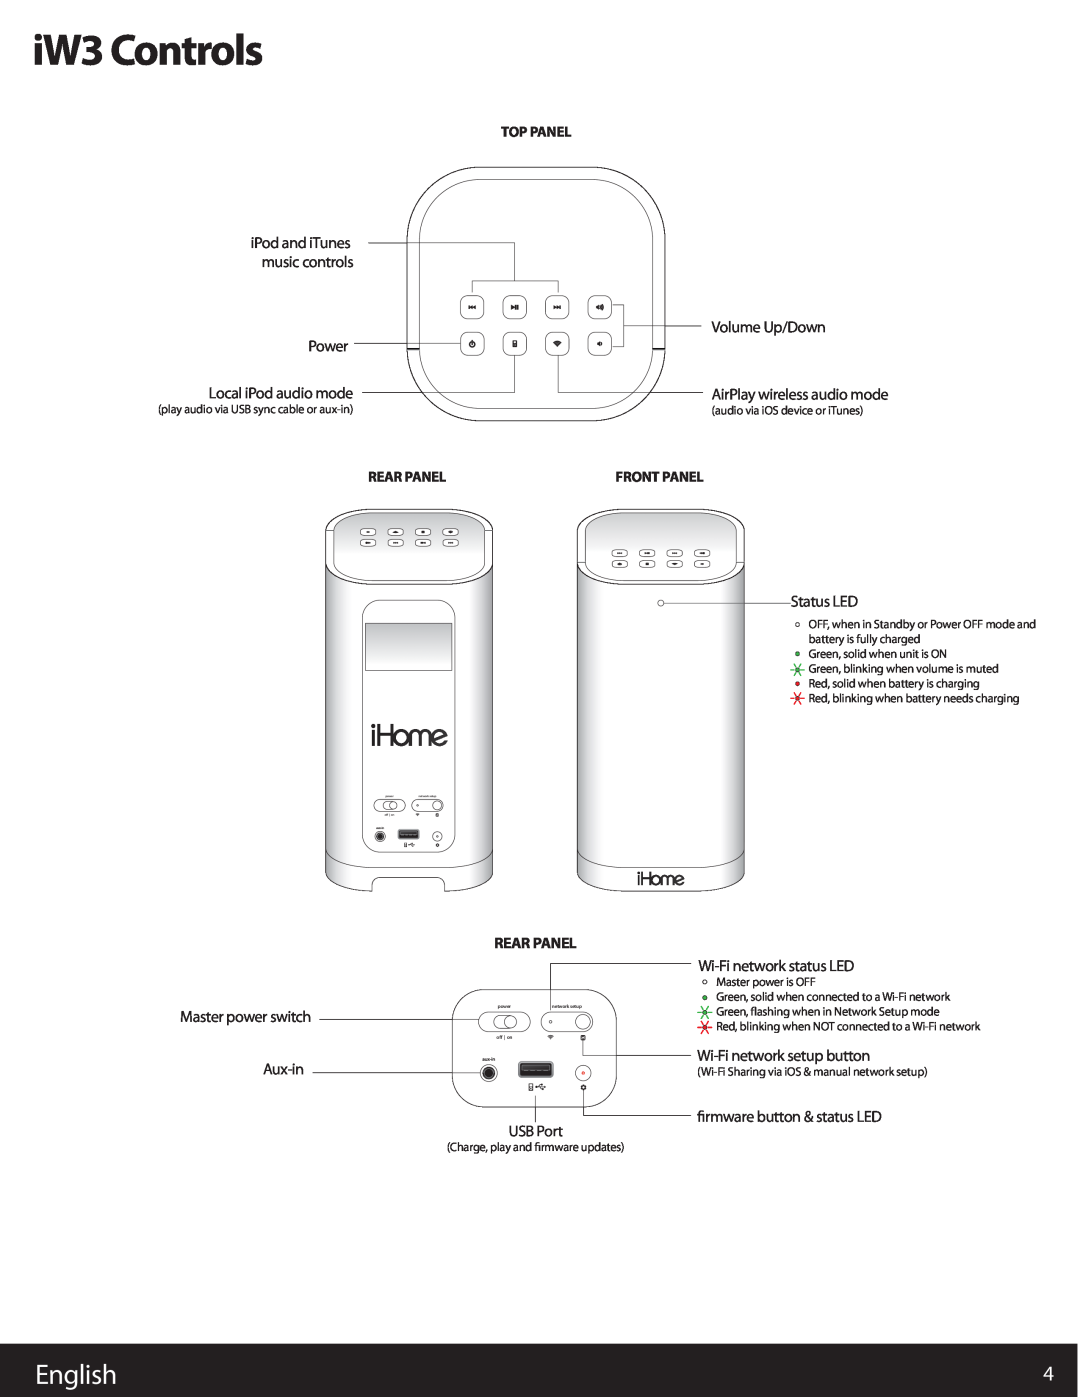 iHome user manual iW3 Controls, English, Rear Panel, Top Panel, iPod and iTunes music controls, Front Panel 